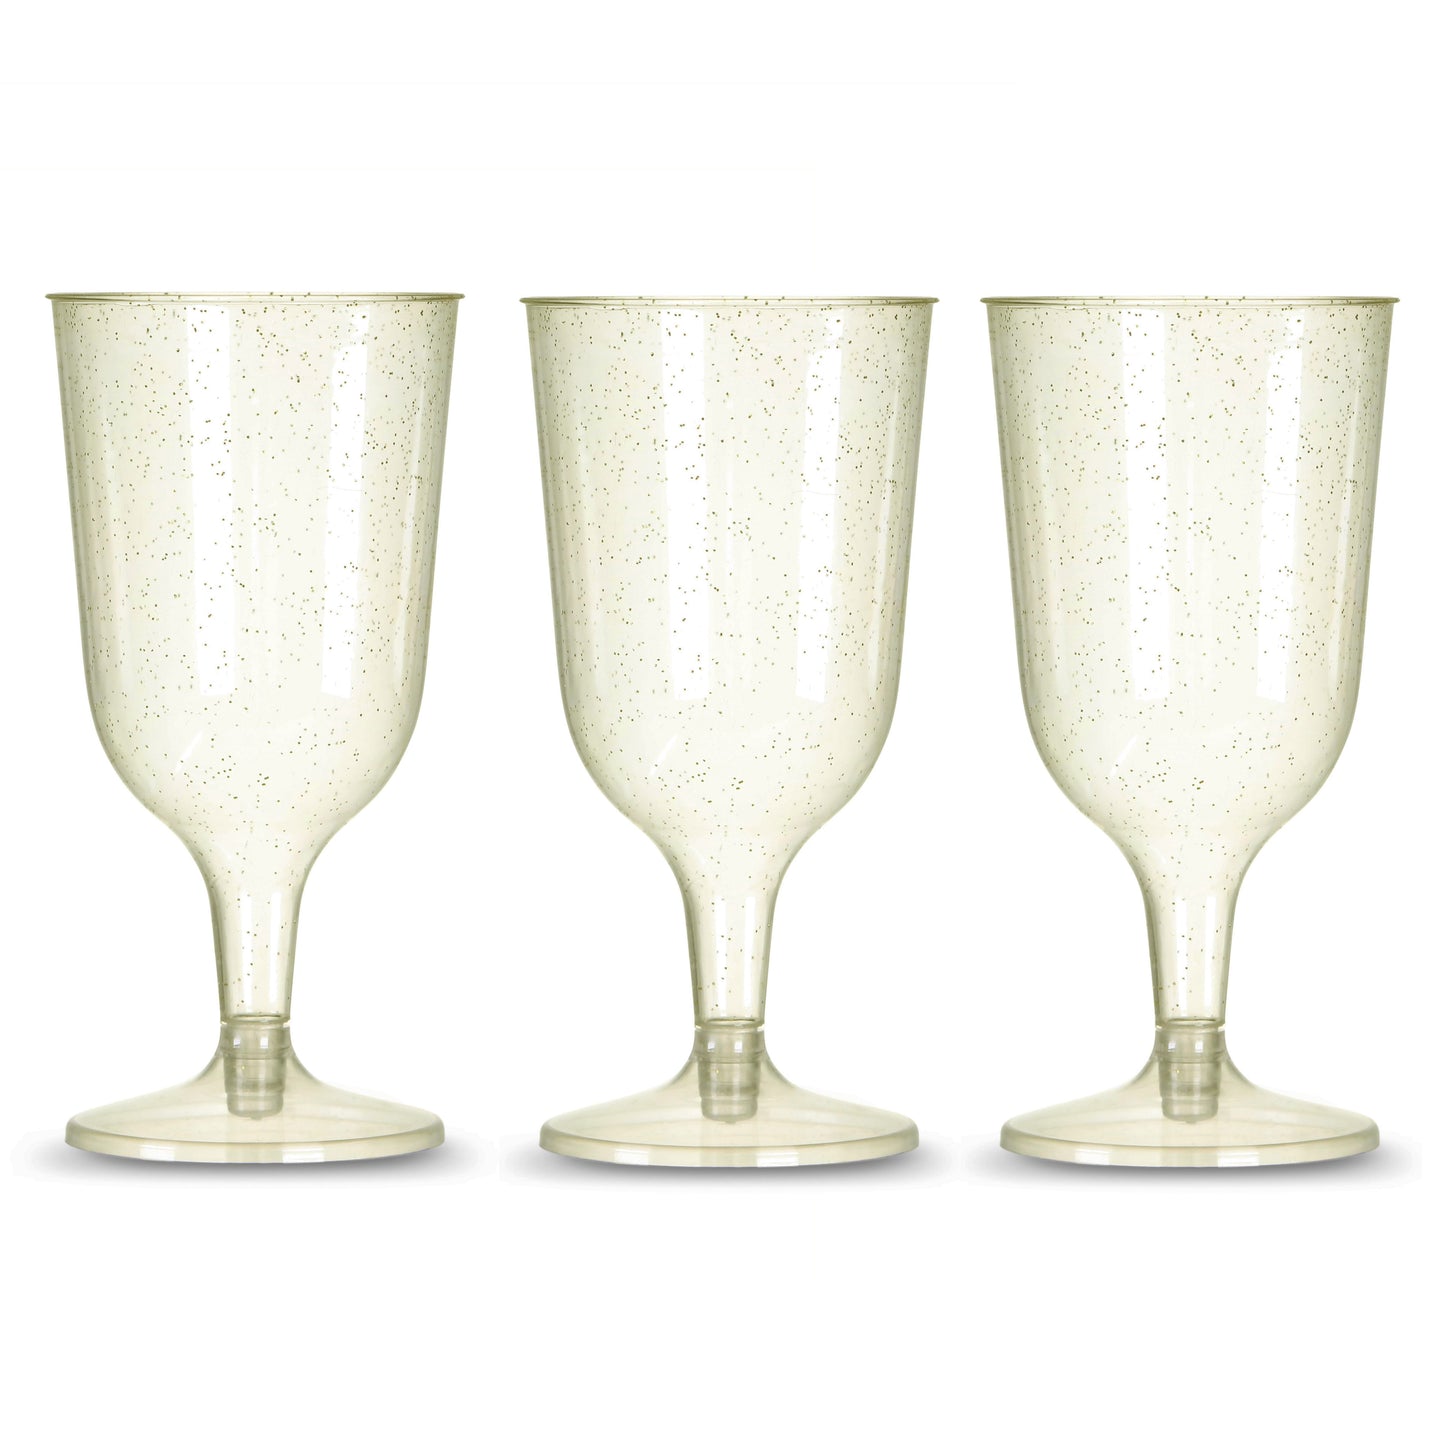 Plastic Wine Glass Gold Glitter Finish - 2 piece - Party, BBQ, Hen Do - Disposable